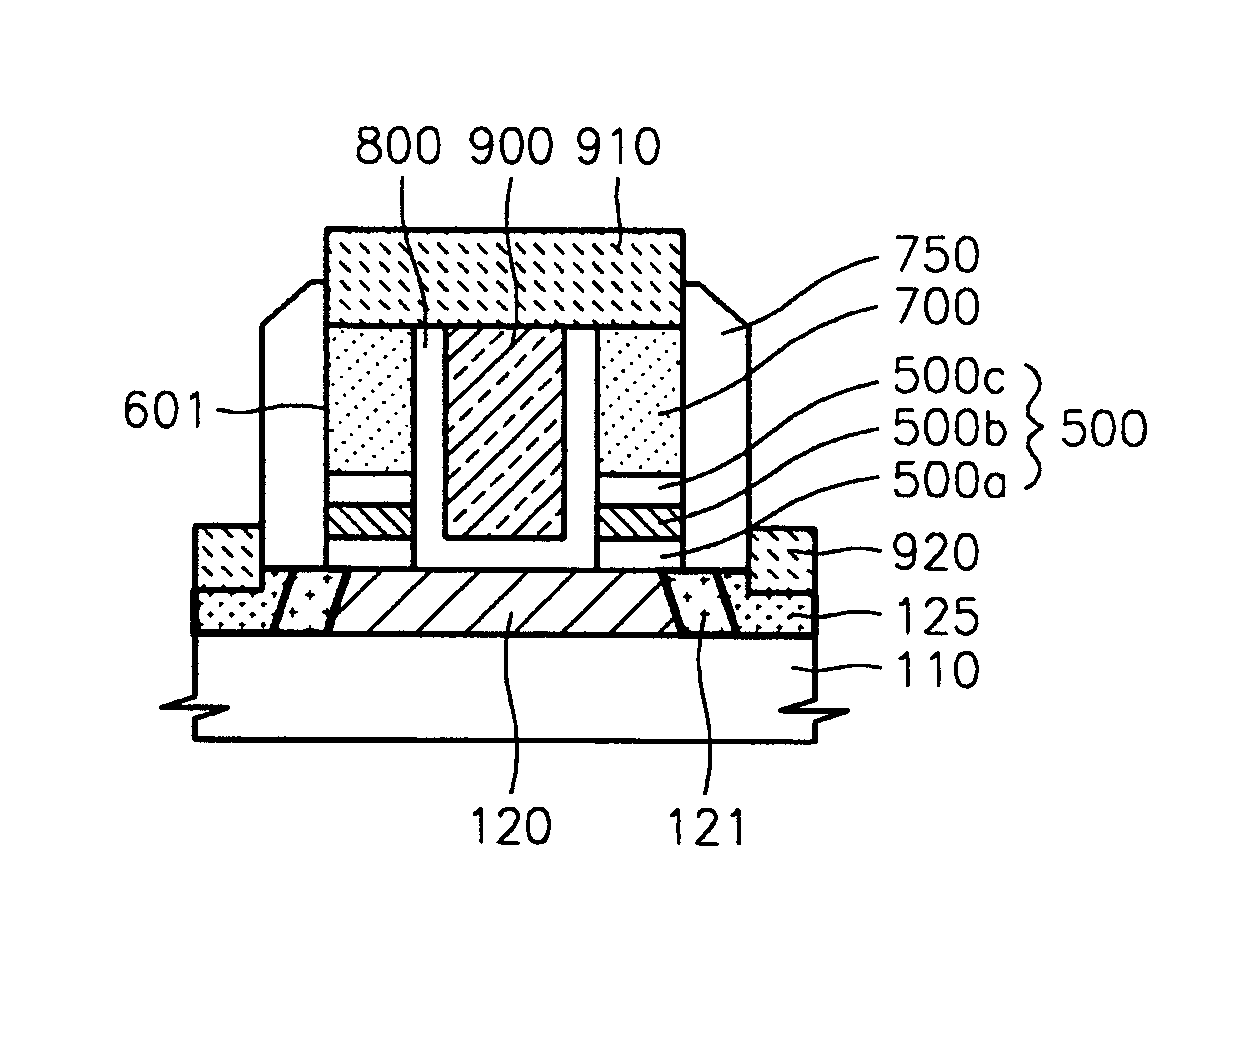 Method of manufacturing twin-ONO-type SONOS memory using reverse self-alignment process